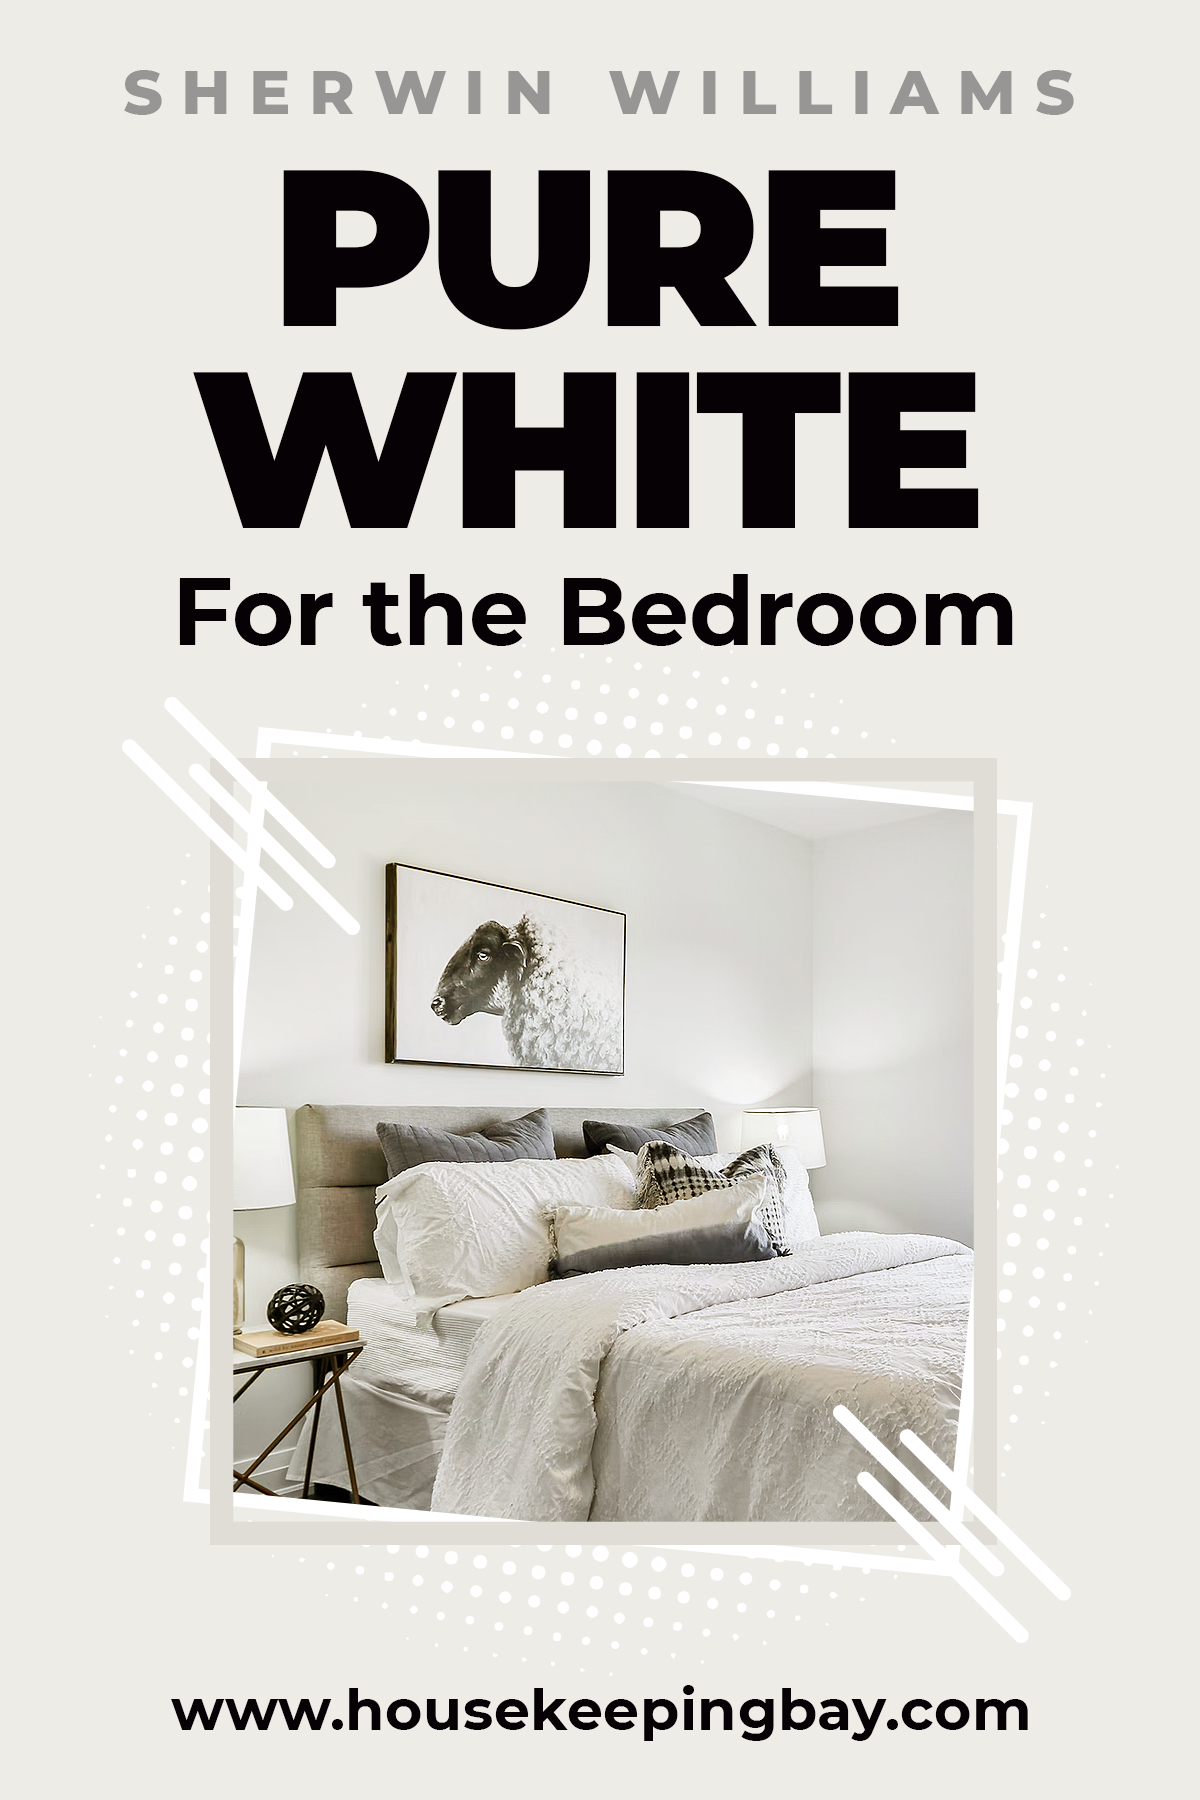 Pure White for the bedroom